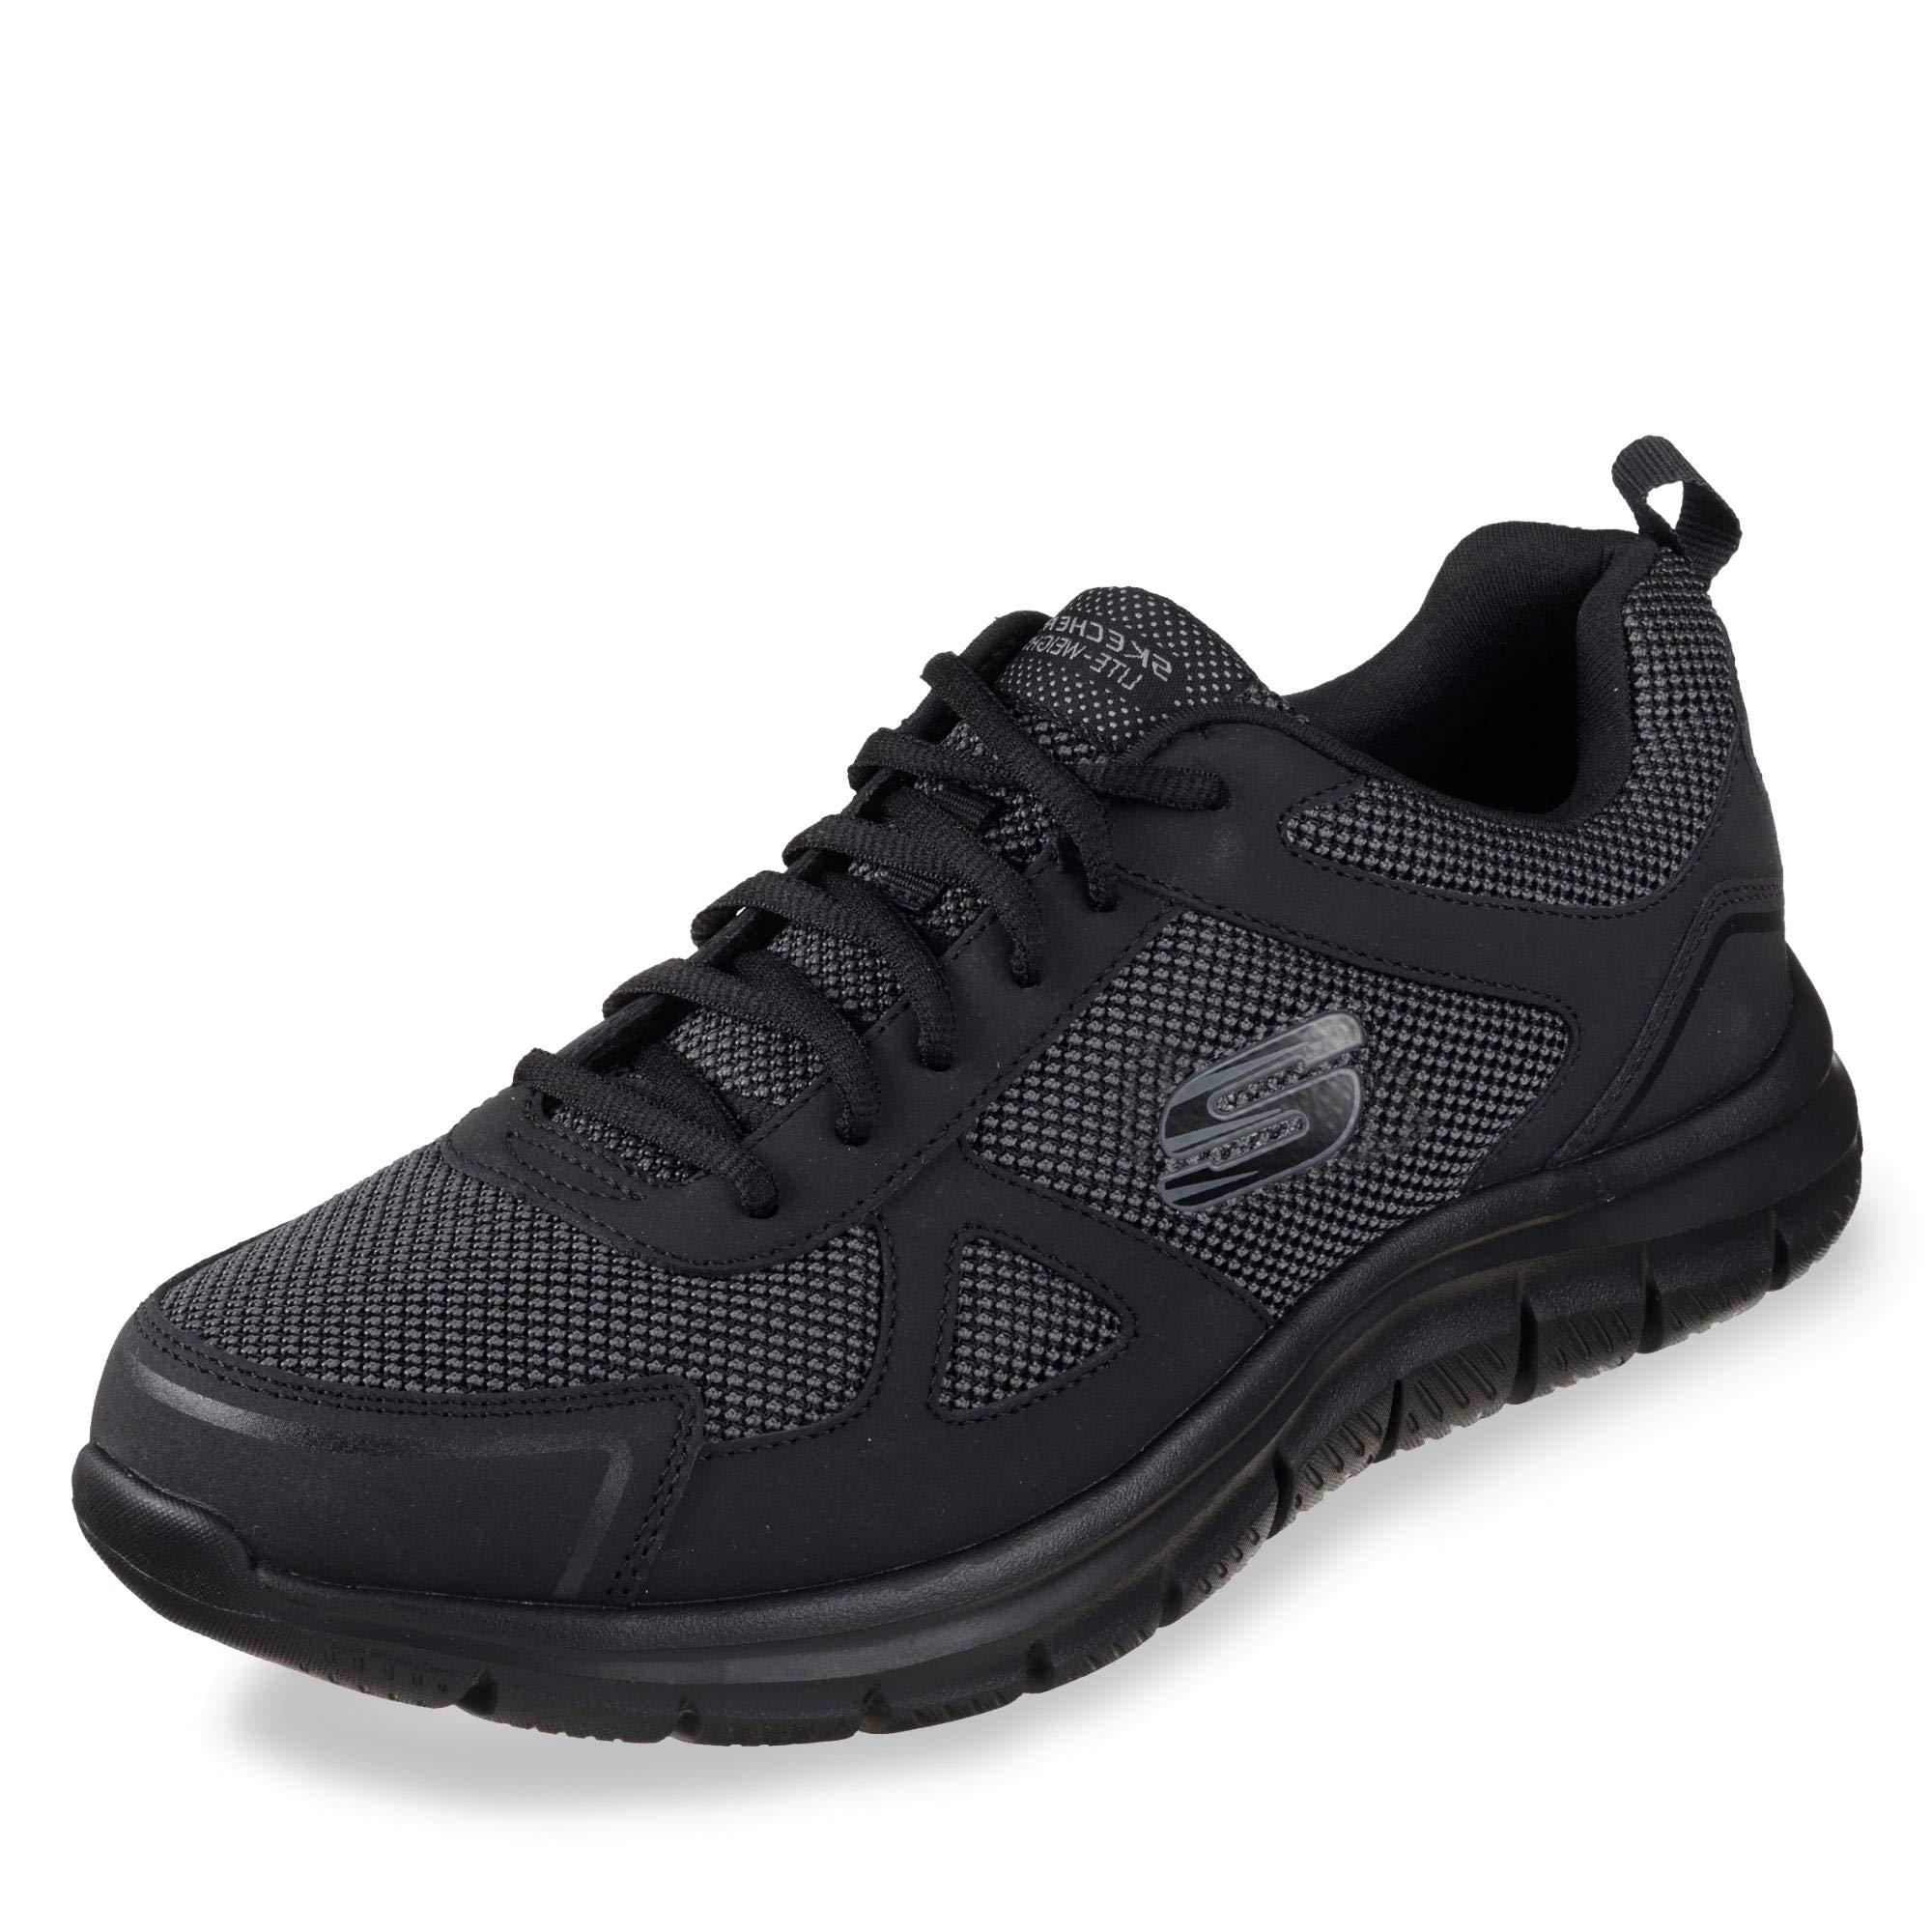 Skechers Leather Track Bucolo Oxford, Black, 12 Uk for Men - Save 51% ...